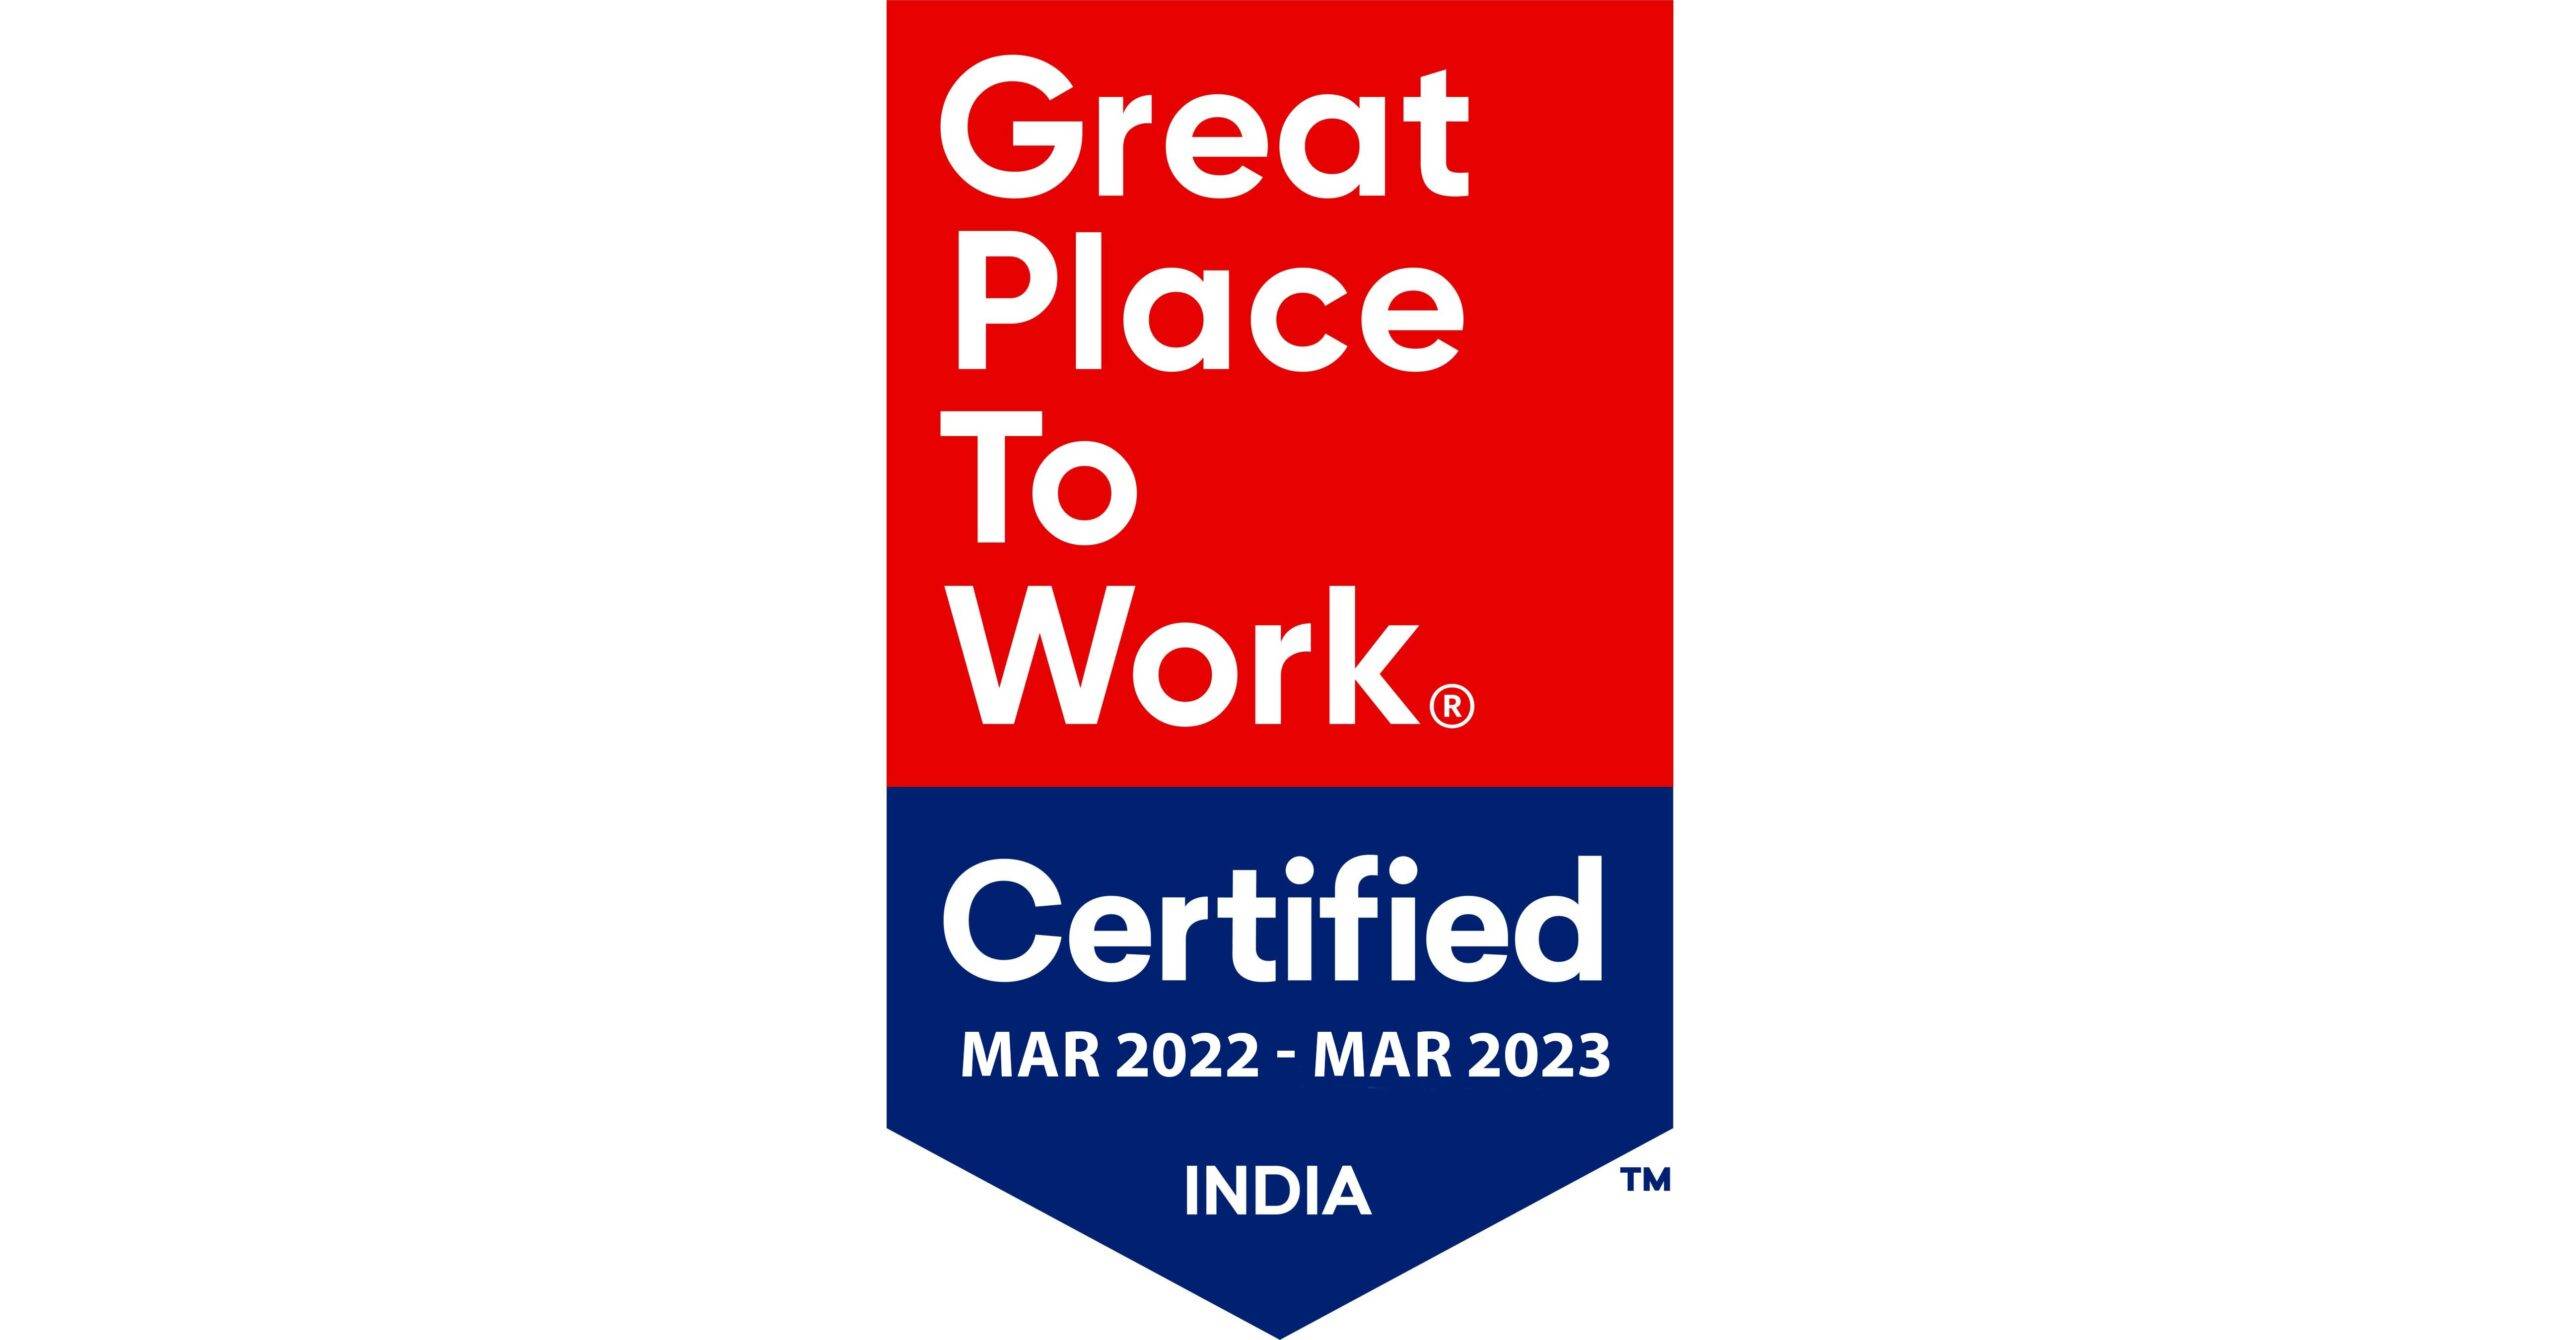 Smartworld Developers Pvt. Ltd. is Nnow a Great Place to Work-Certified